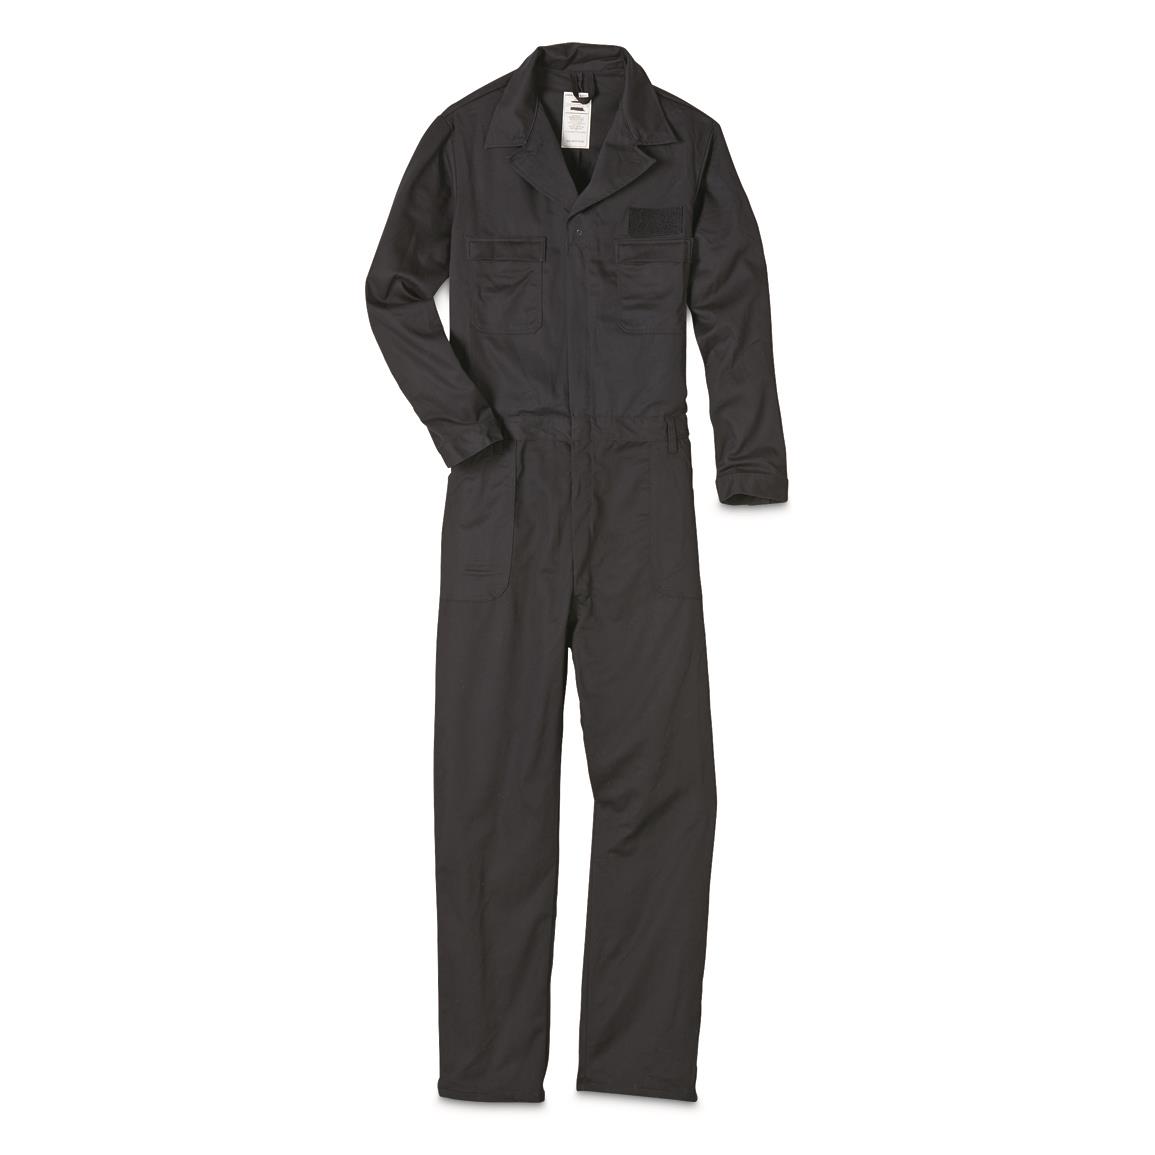 U.S. Military Surplus Flame Resistant Coveralls, Used